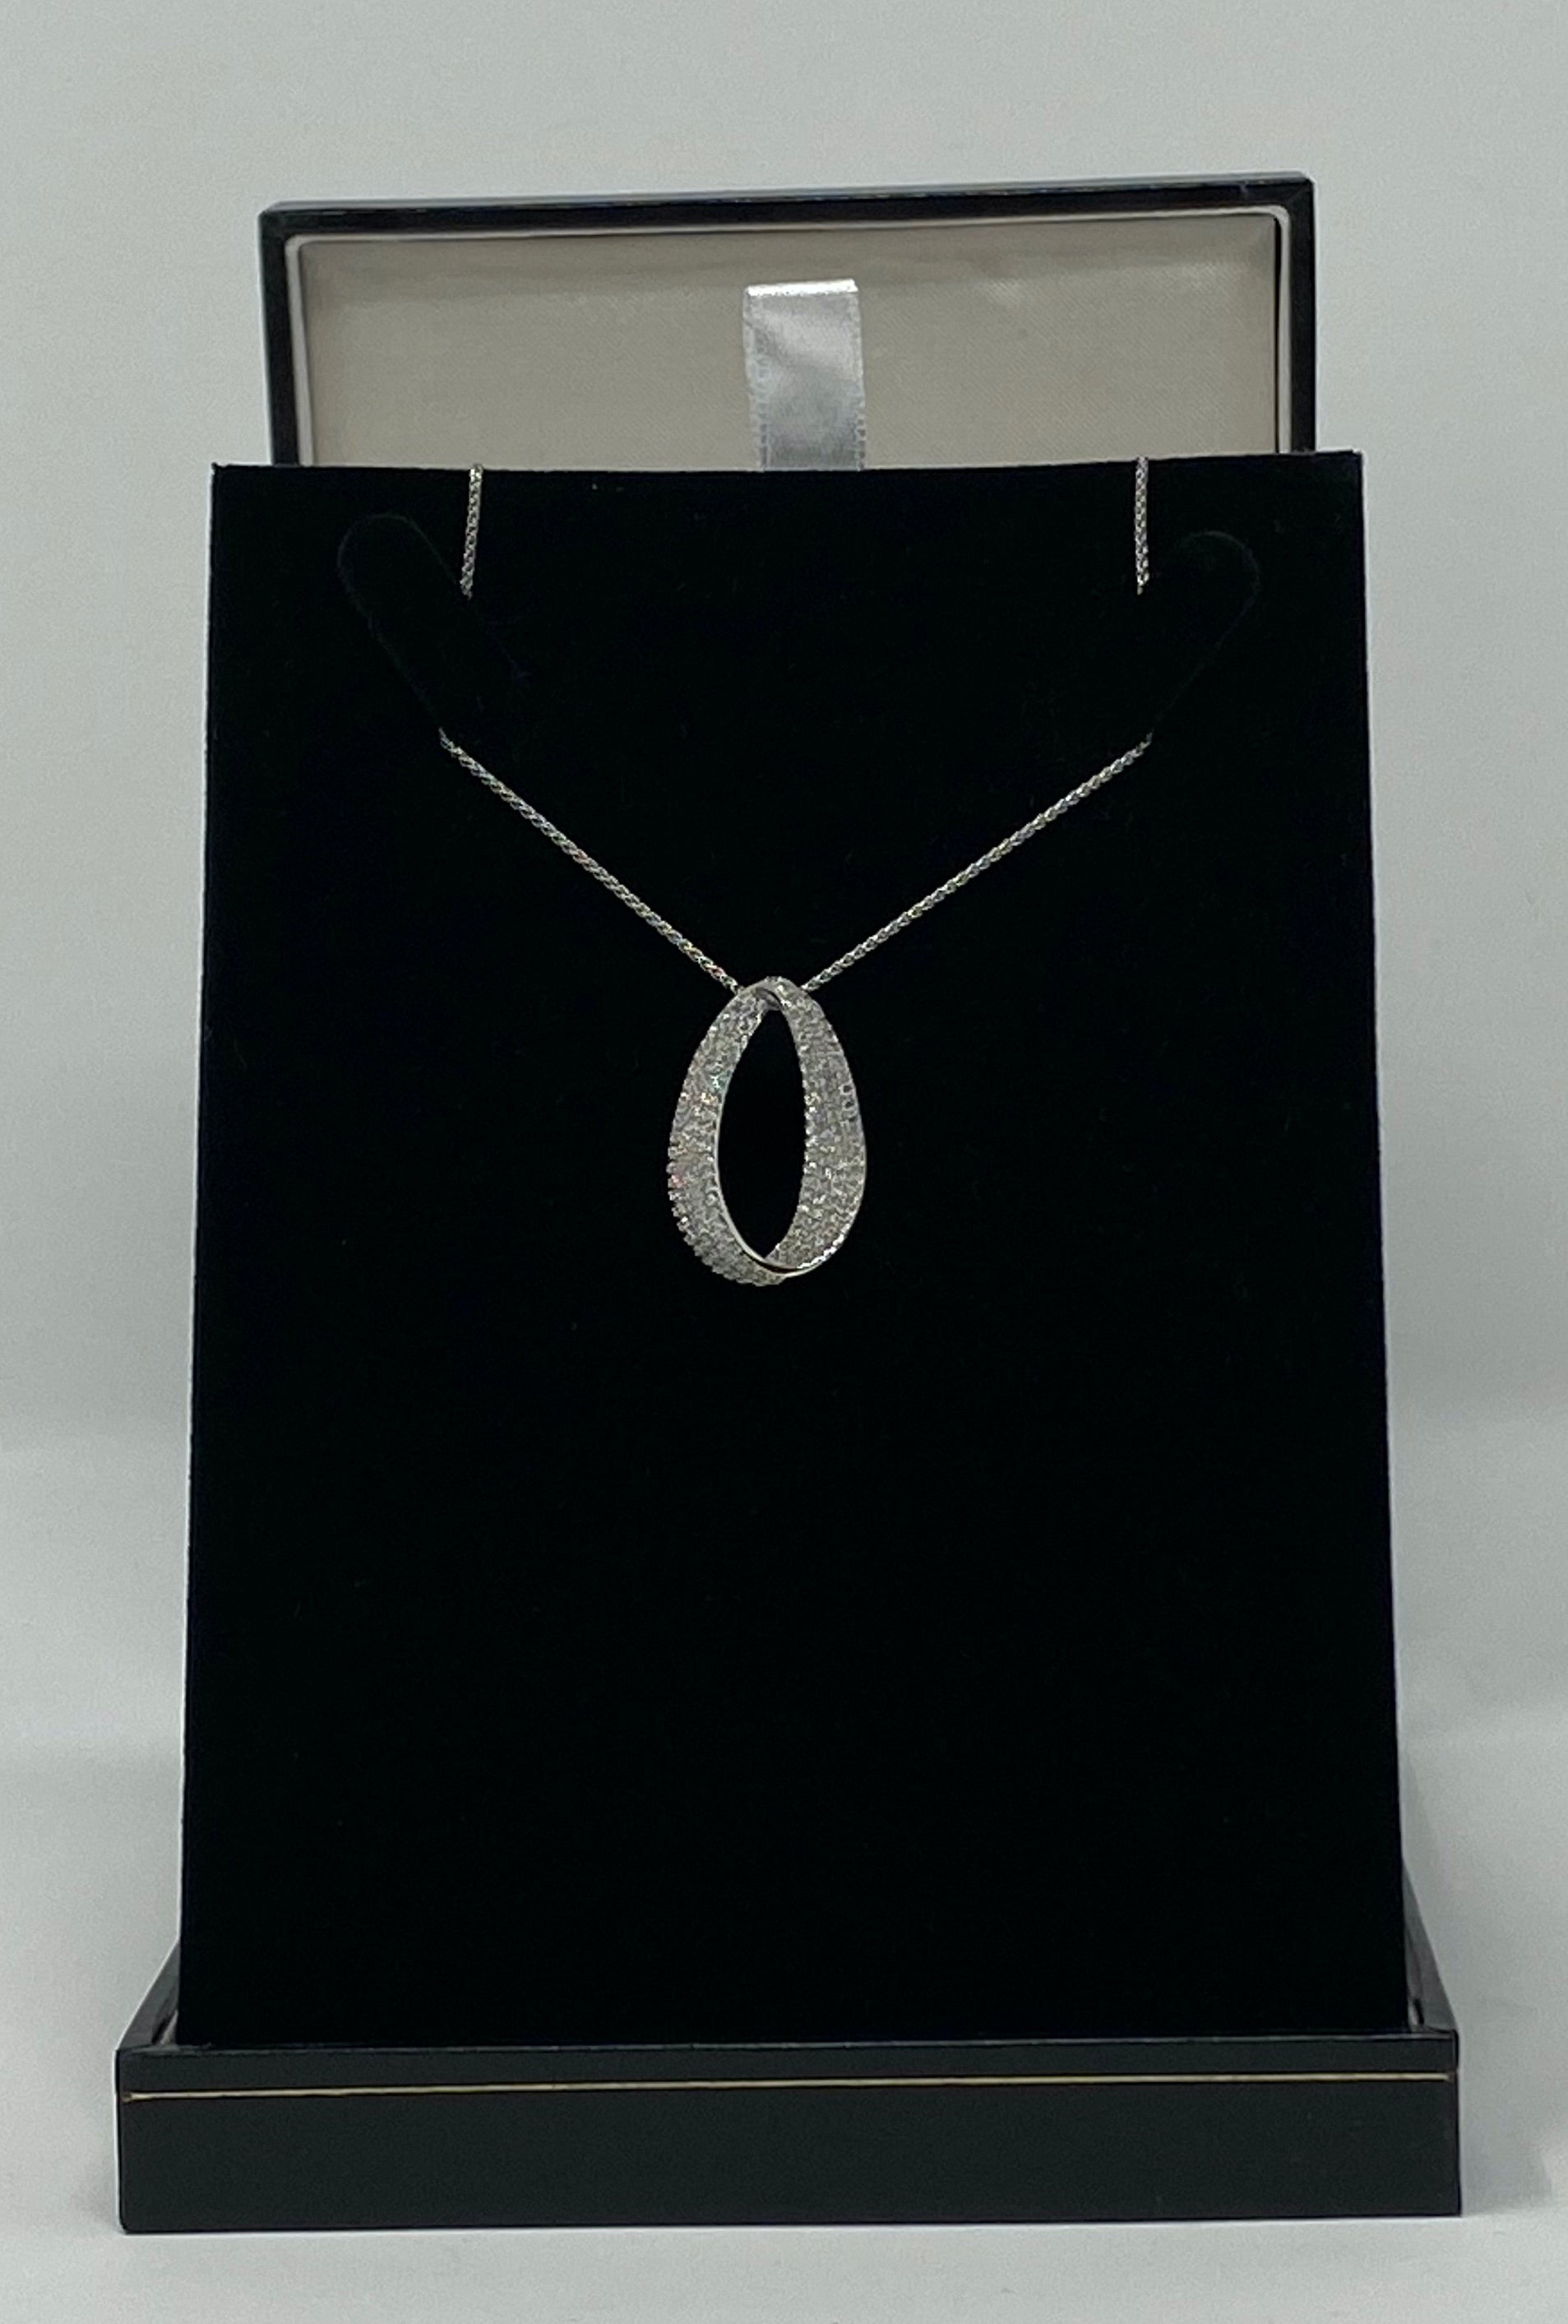 Silver and Cubic Zirconia Necklace